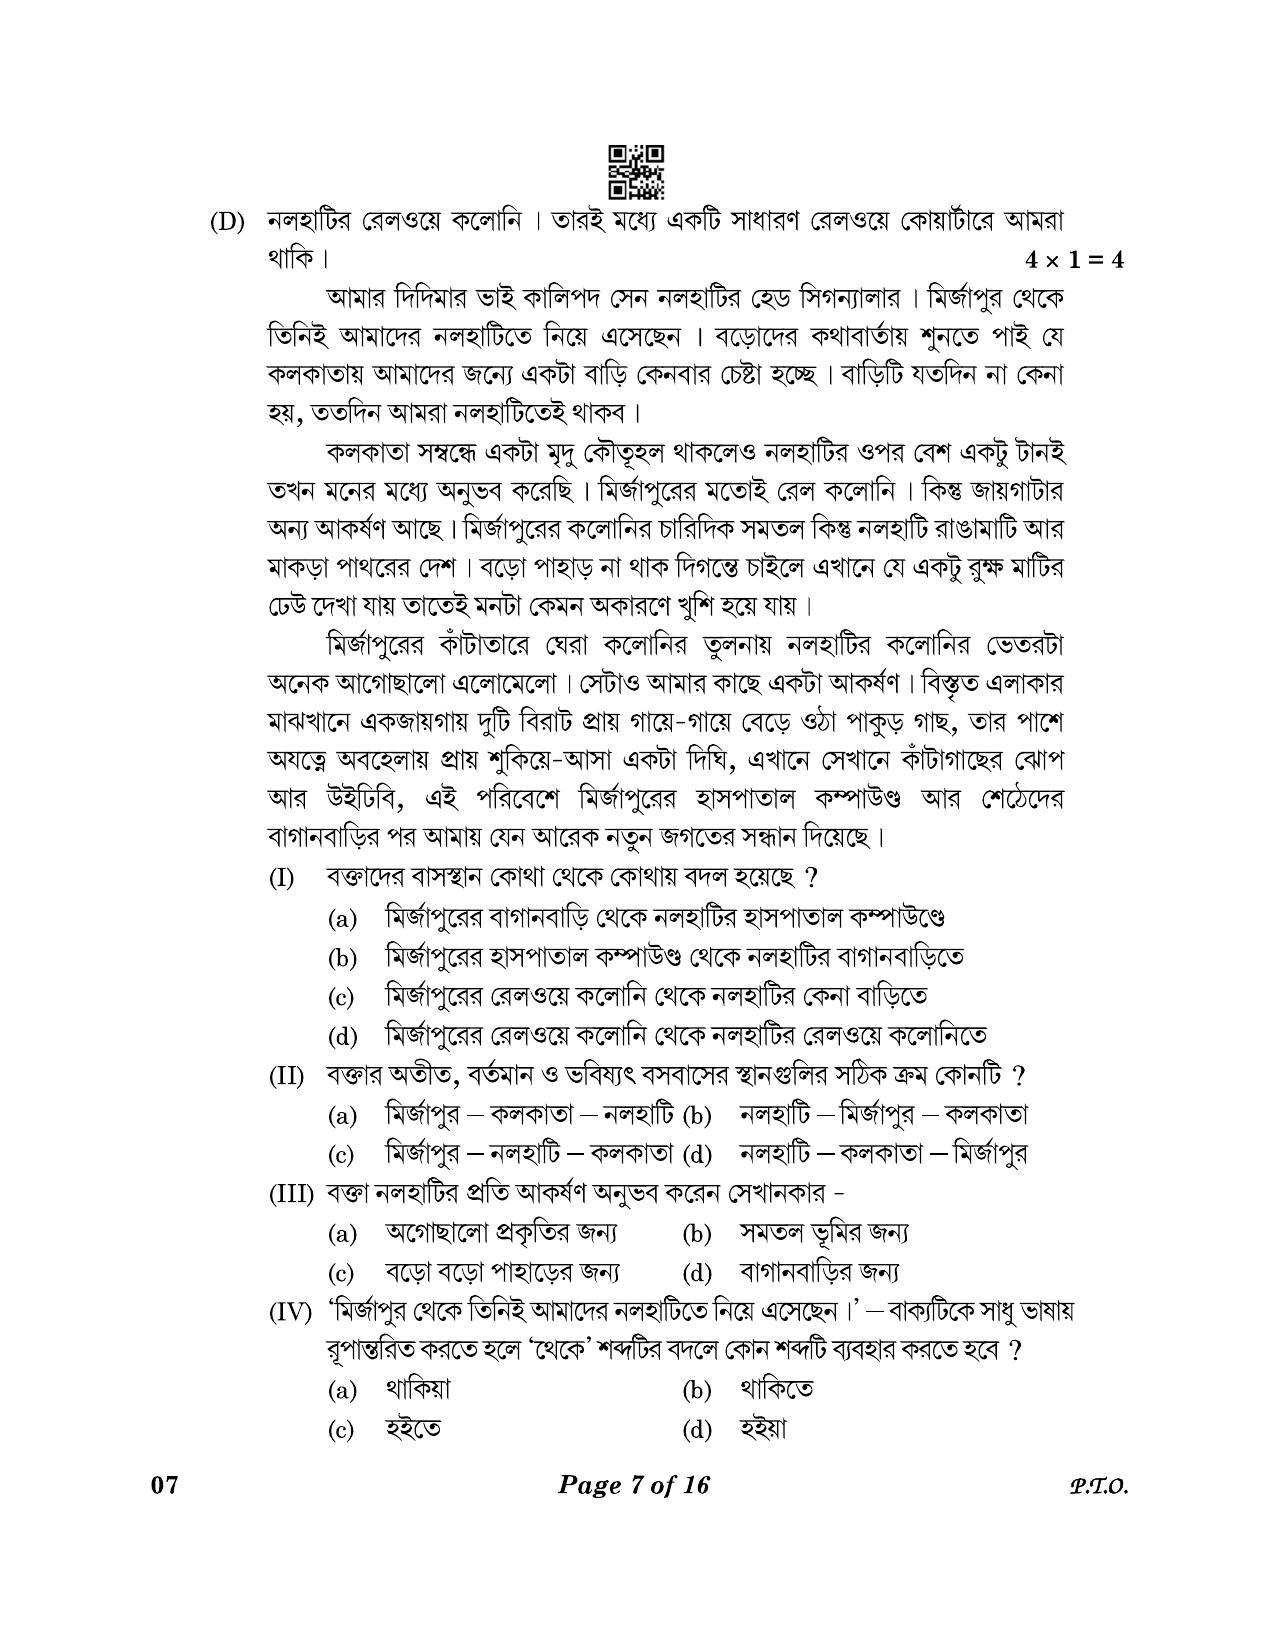 CBSE Class 10 07_Bengali 2023 Question Paper - Page 7